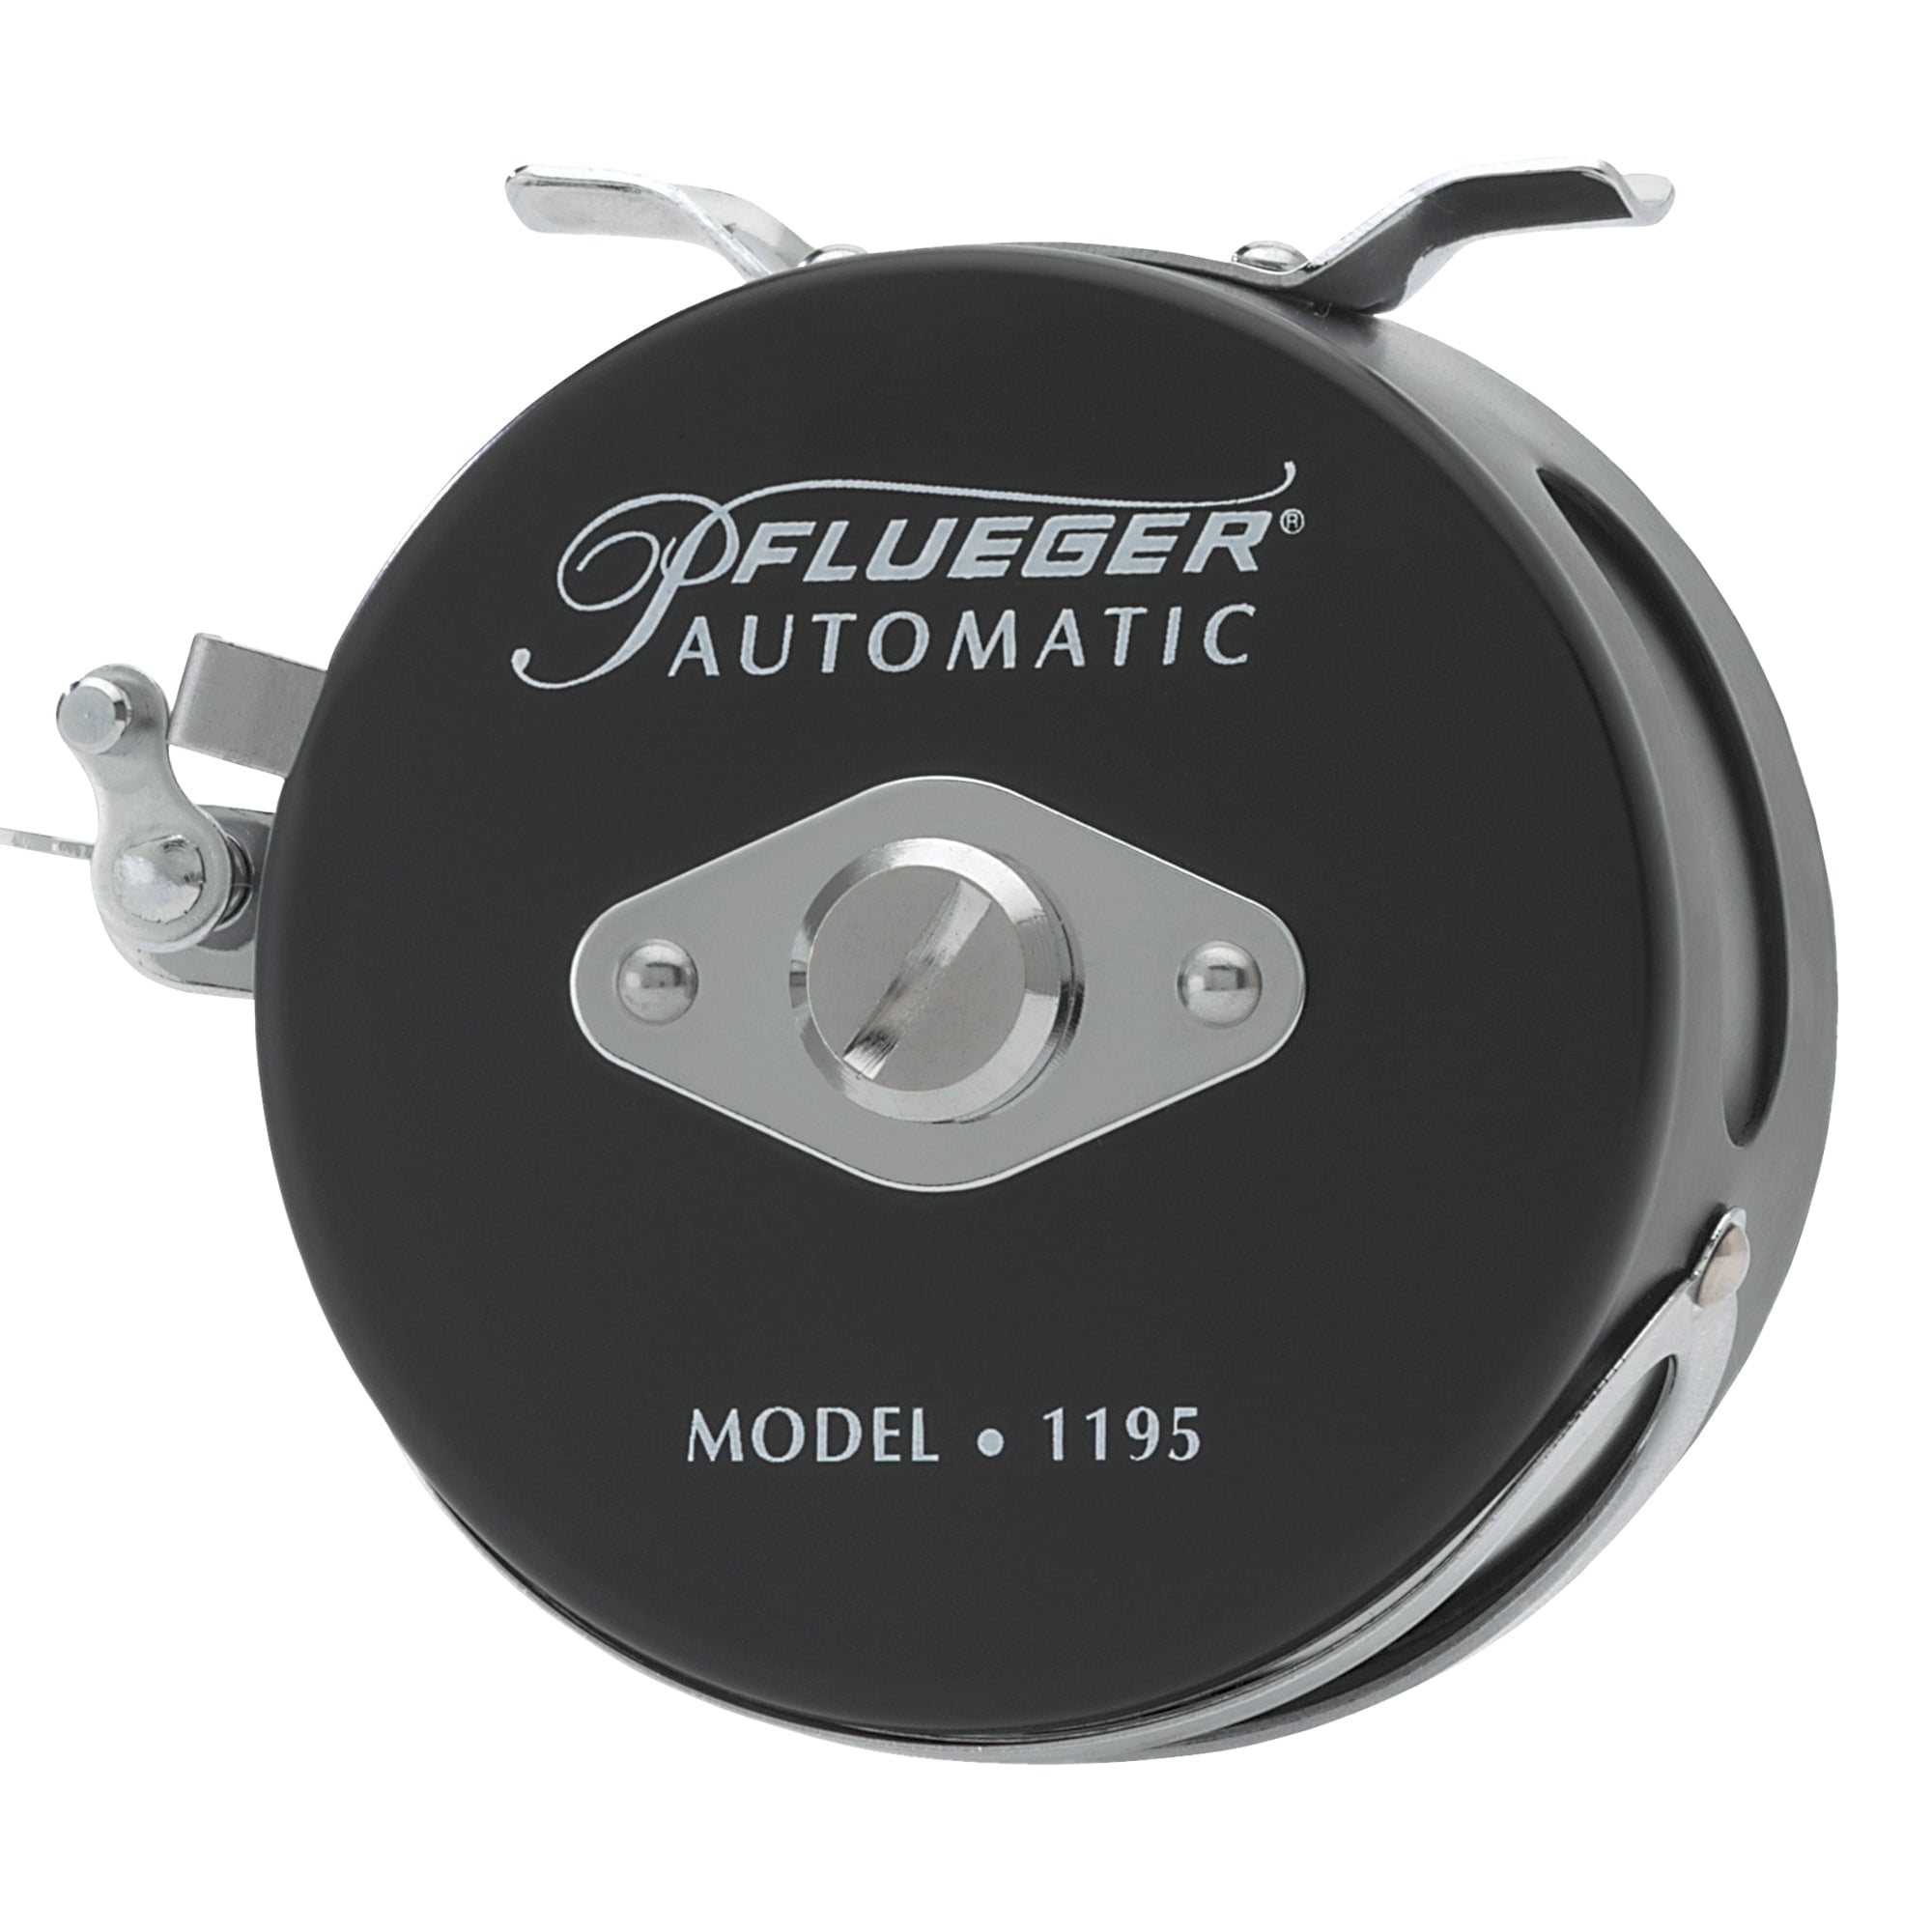 Pflueger Automatic Fly Reels, Size 44385 Fishing Reel